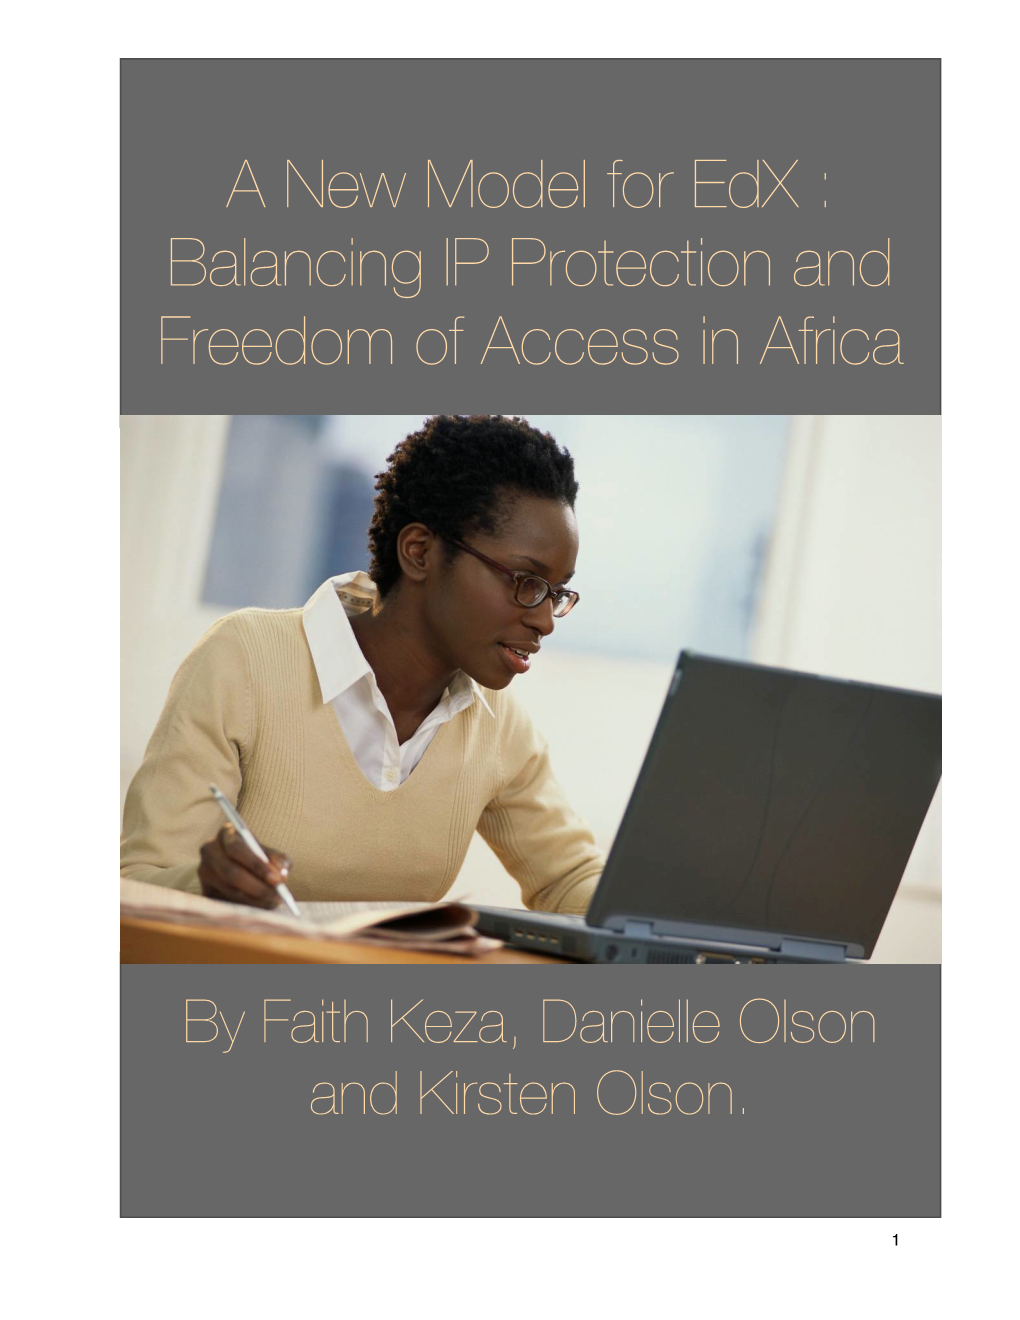 A New Model for Edx : Balancing IP Protection and Freedom of Access in Africa